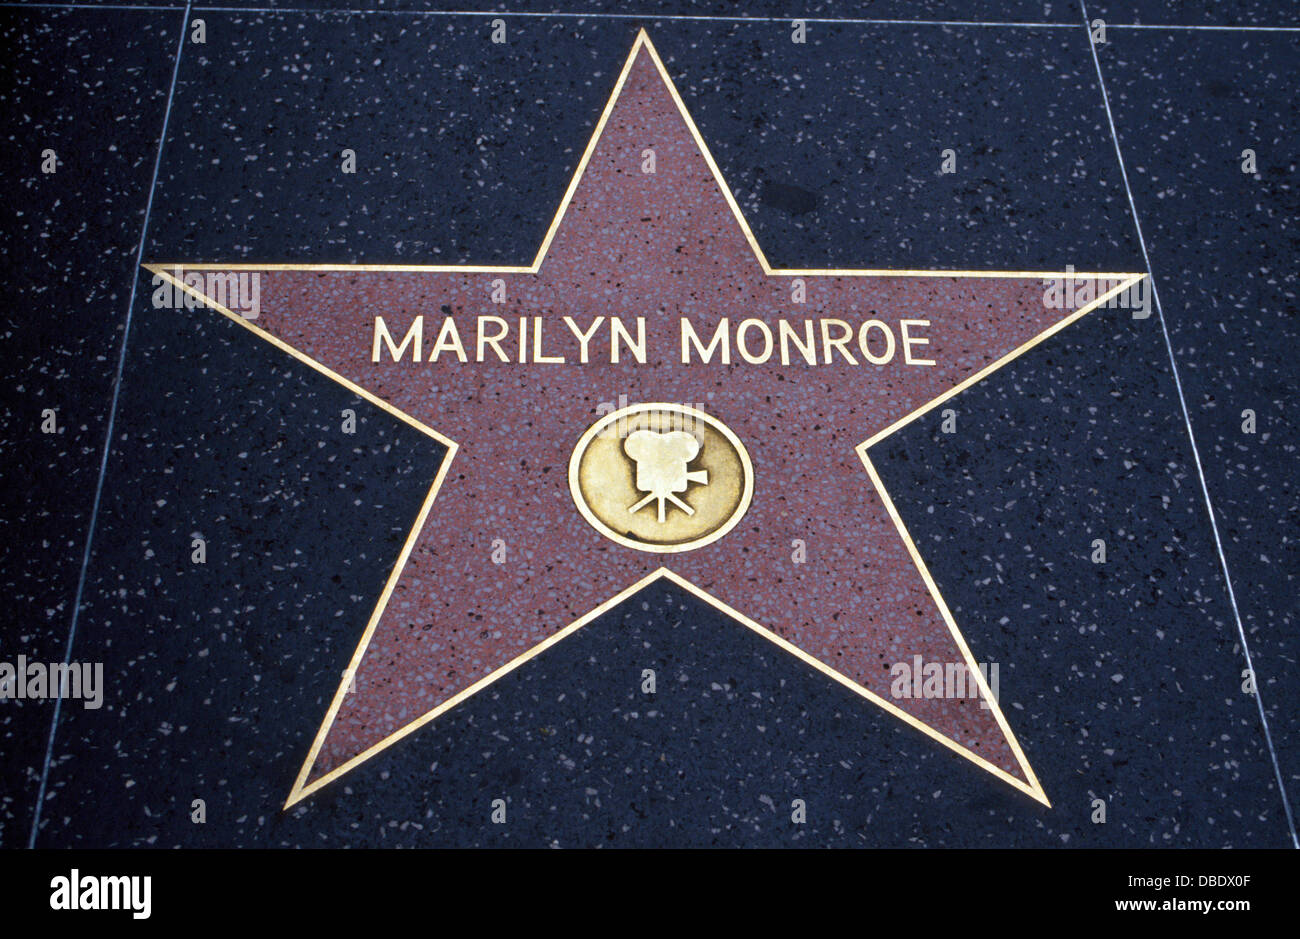 Movie star Marilyn Monroe is one of more than 2,500 celebrities who have been honored with a star on the Hollywood Walk of Fame in California, USA. Stock Photo